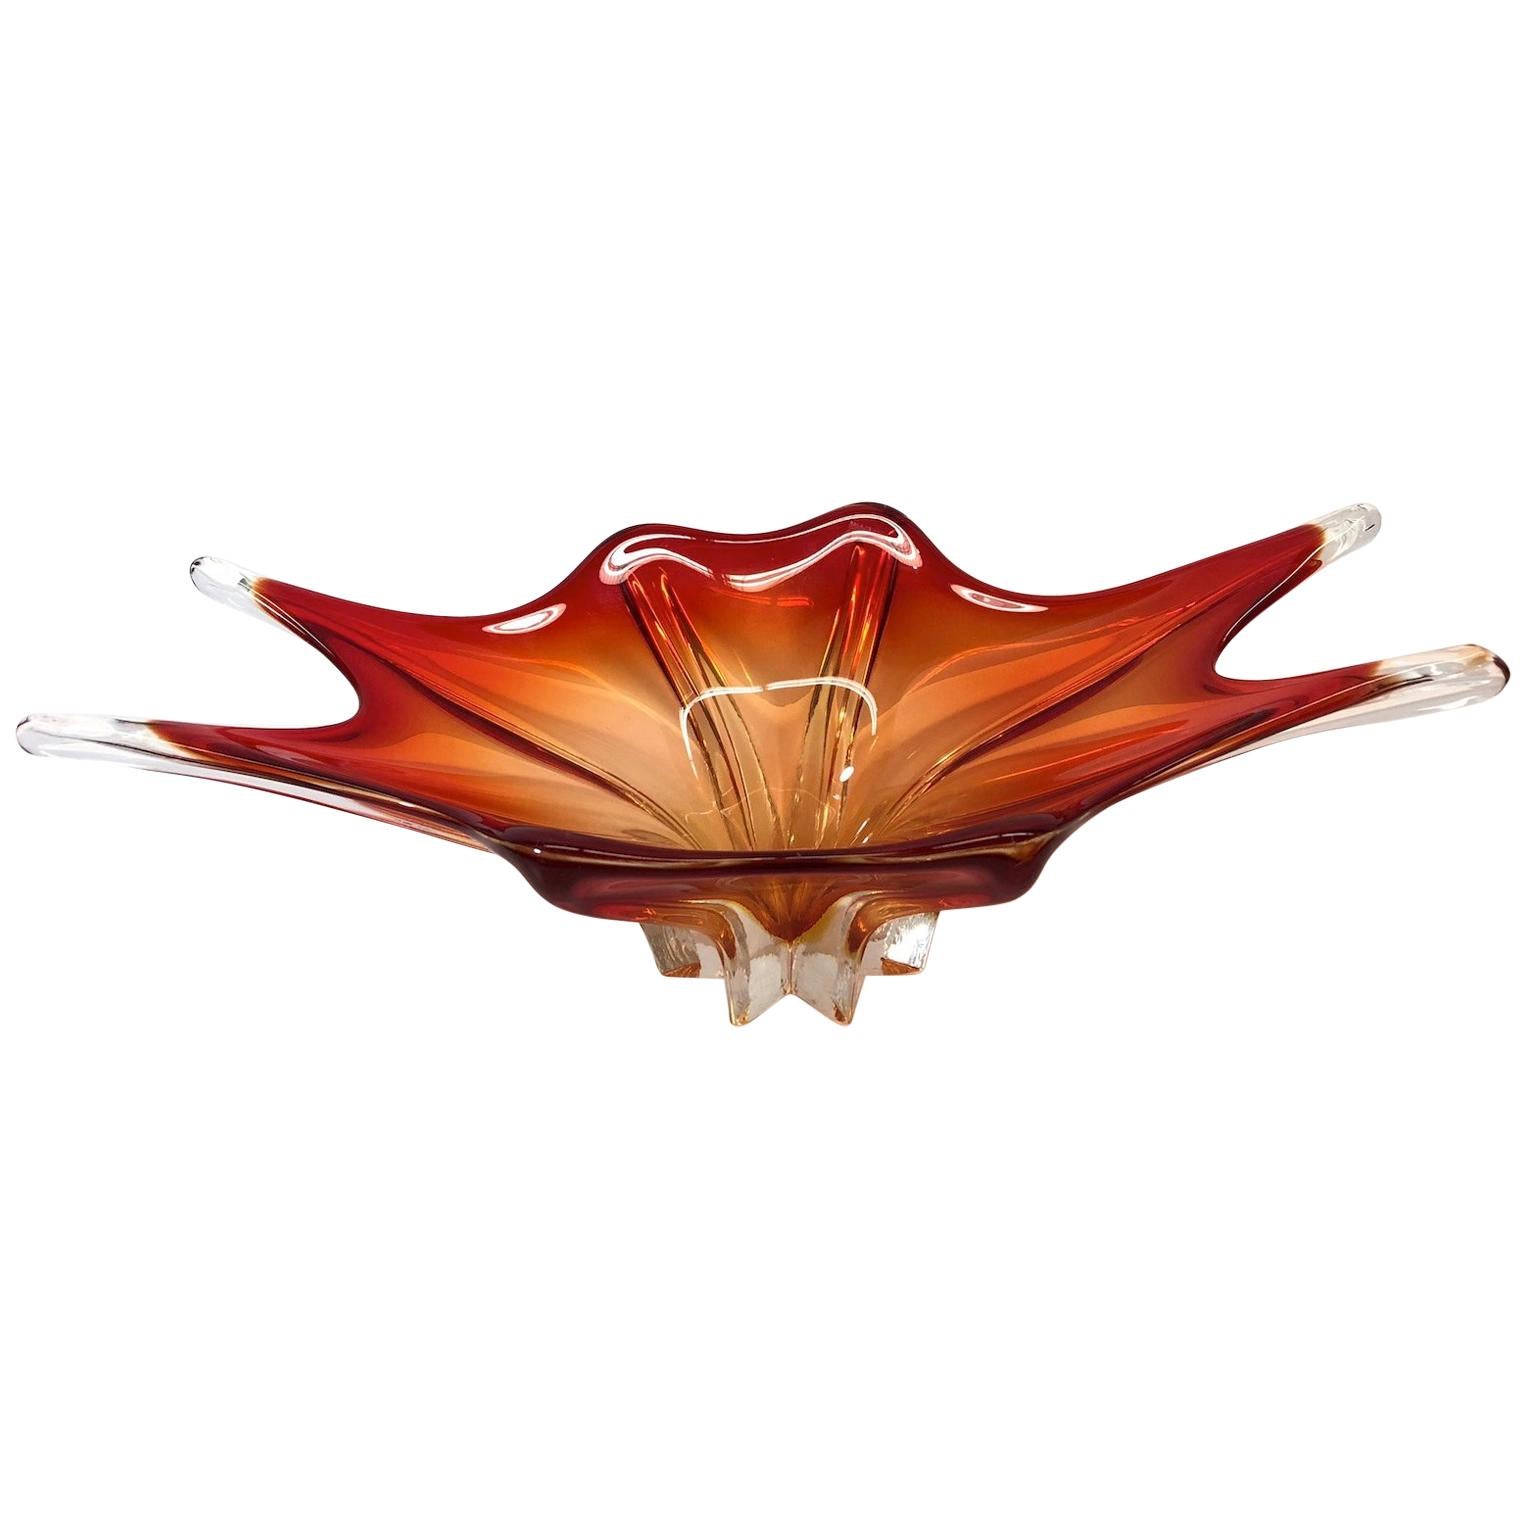 Gorgeous Murano Art Glass Sommerso Bowl Red and Orange Vintage, Italy, 1960s